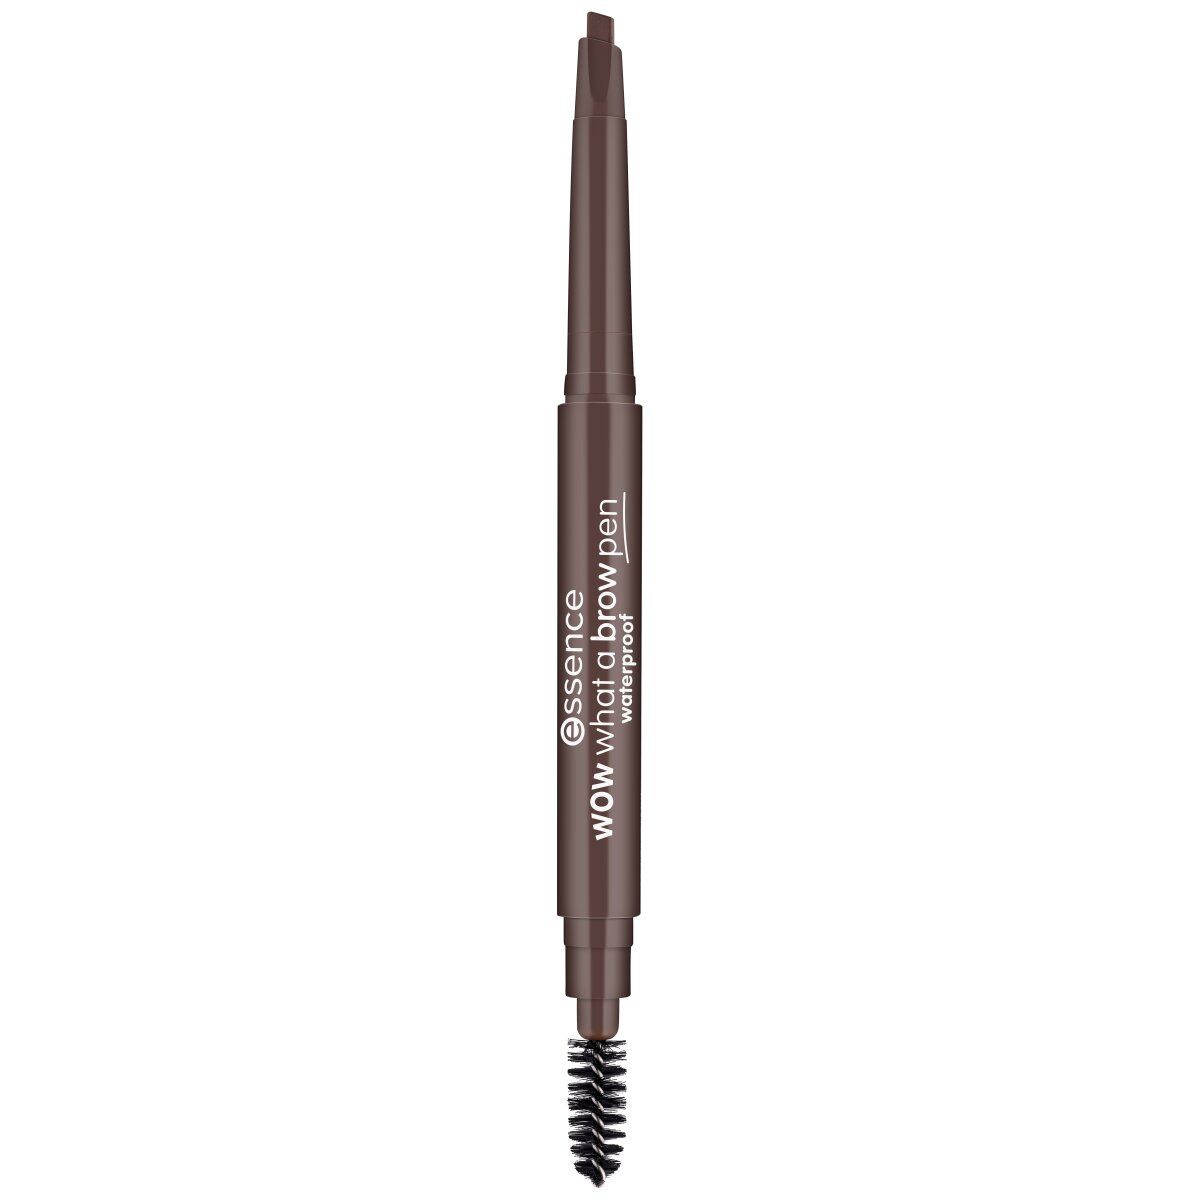 Essence Wow What a Brow Pen Waterproof | Shop Today. Get it Tomorrow ...